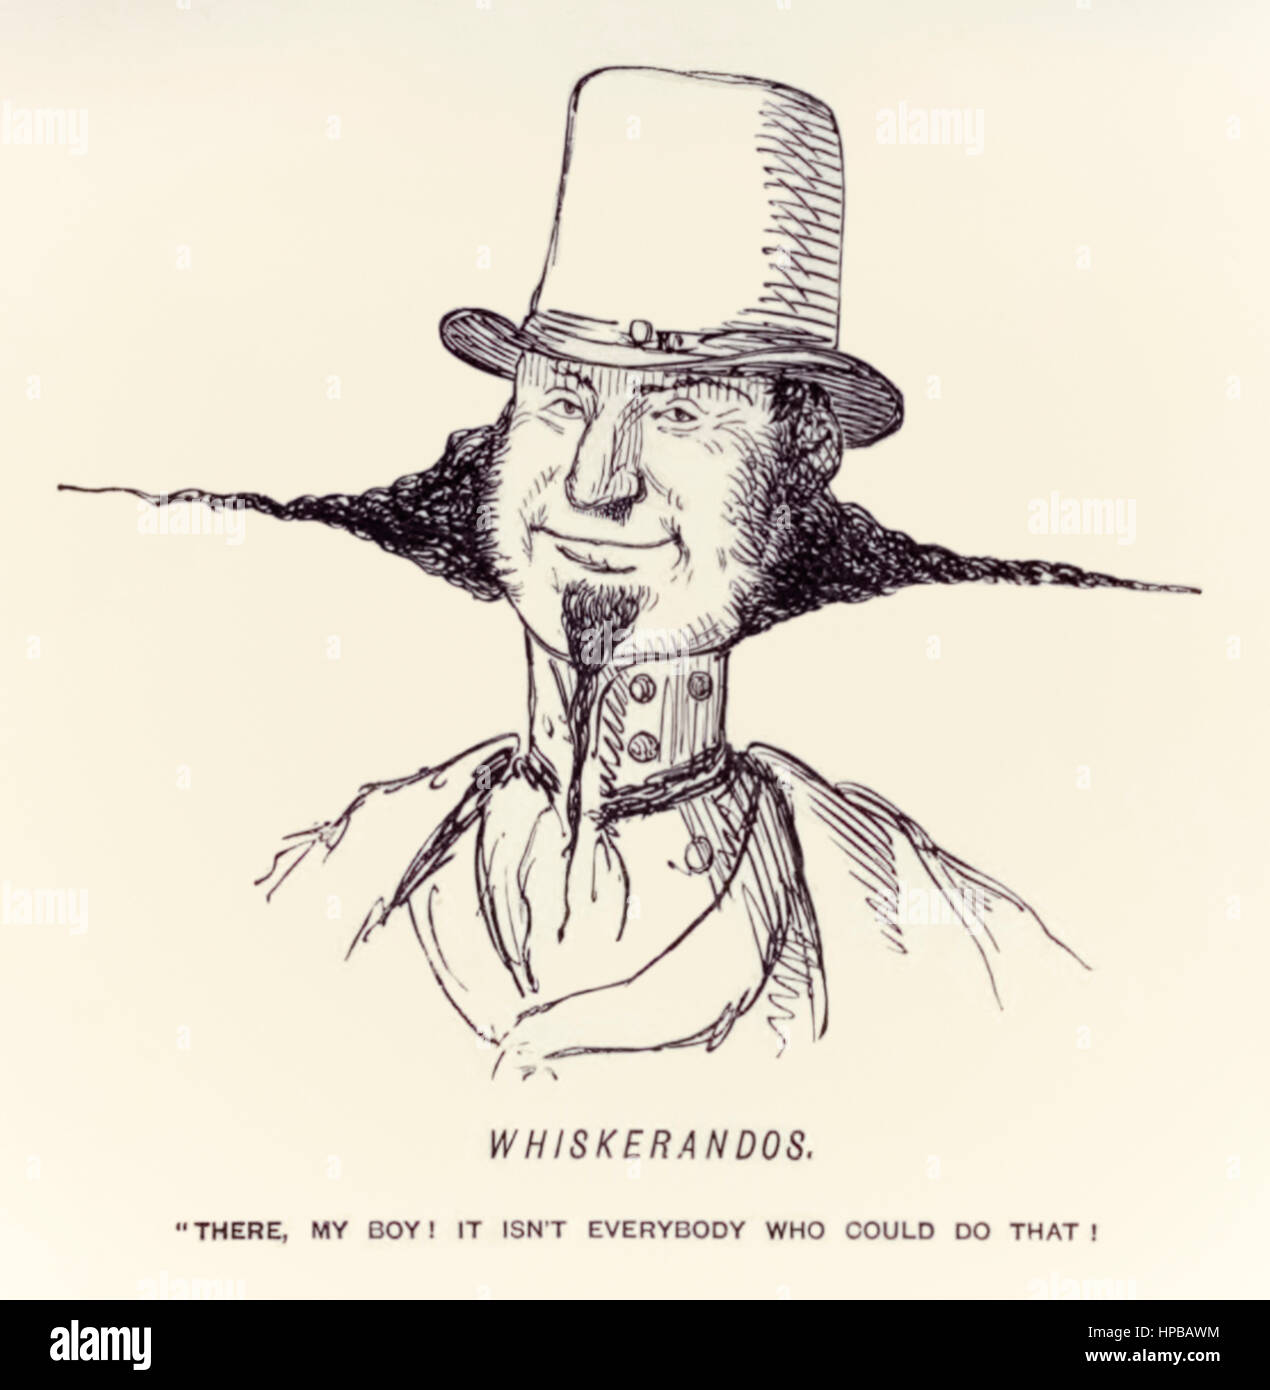 “Whiskerandos – “There, my boy! It isn’t everybody who could do that!”” illustration by John Leech (1817-1864) published in the satirical magazine ‘Punch’ in 1854. Stock Photo